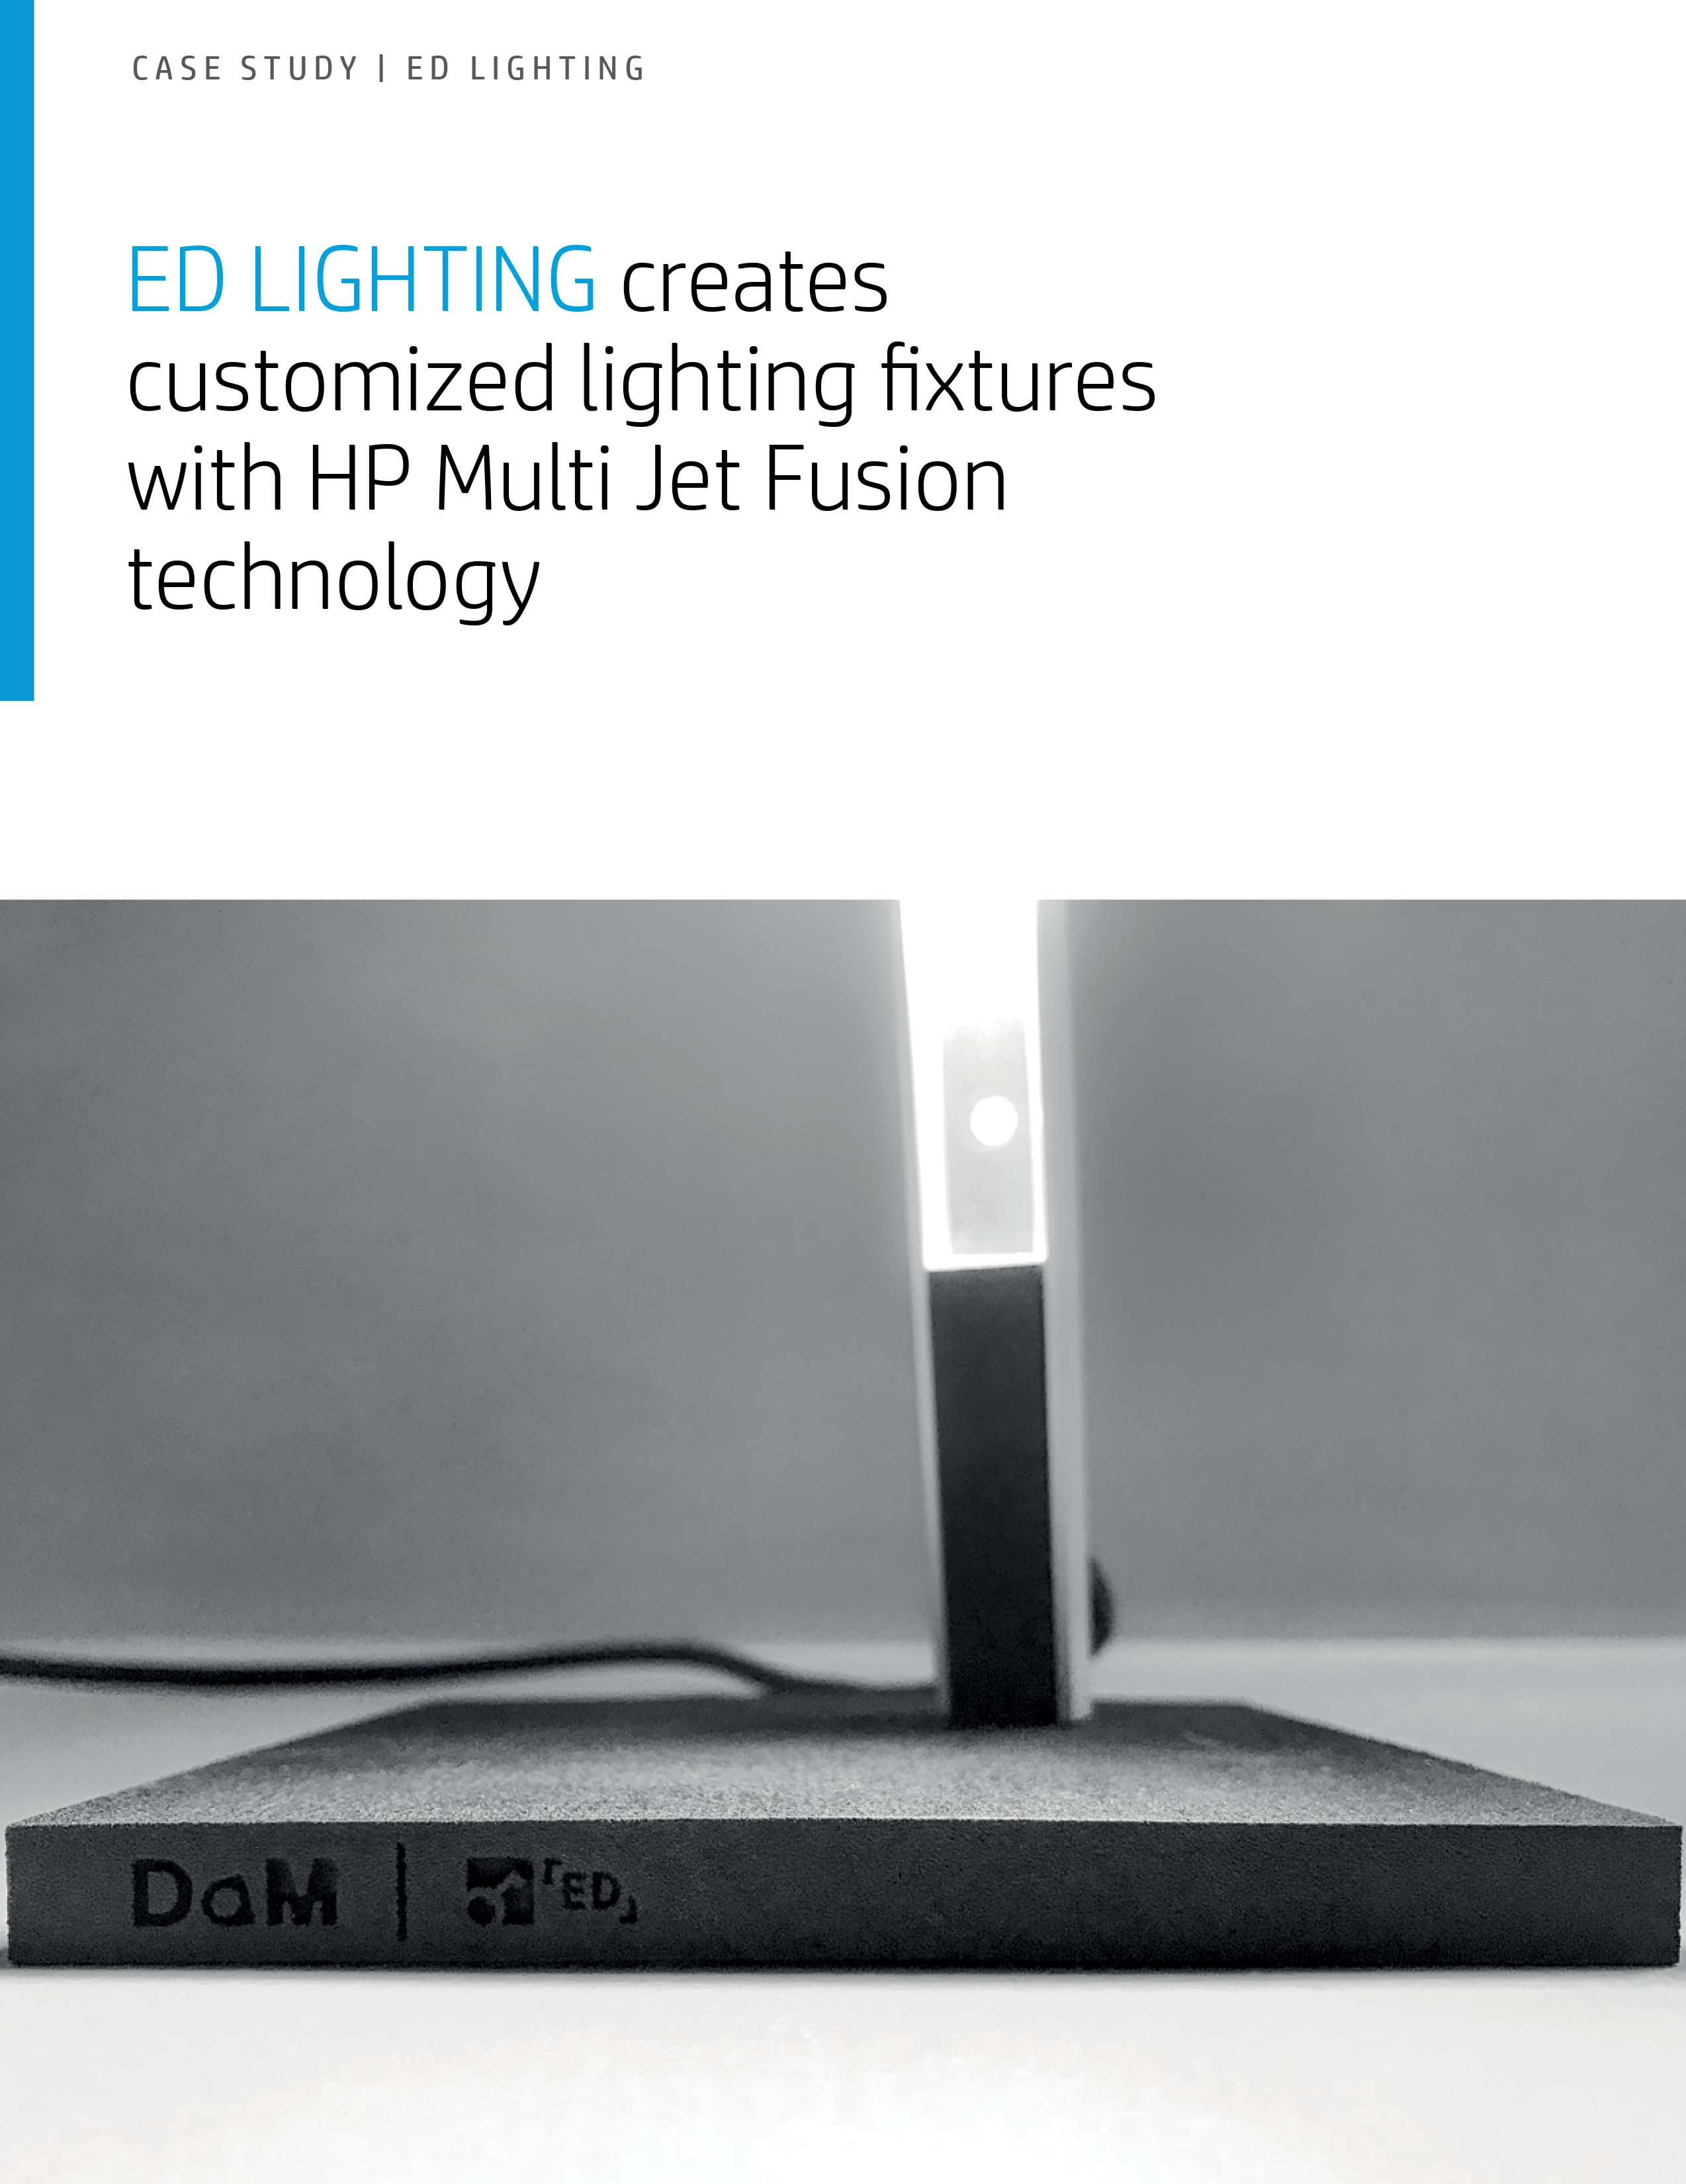 ED LIGHTING creates customized lighting fixtures with HP Multi Jet Fusion technology